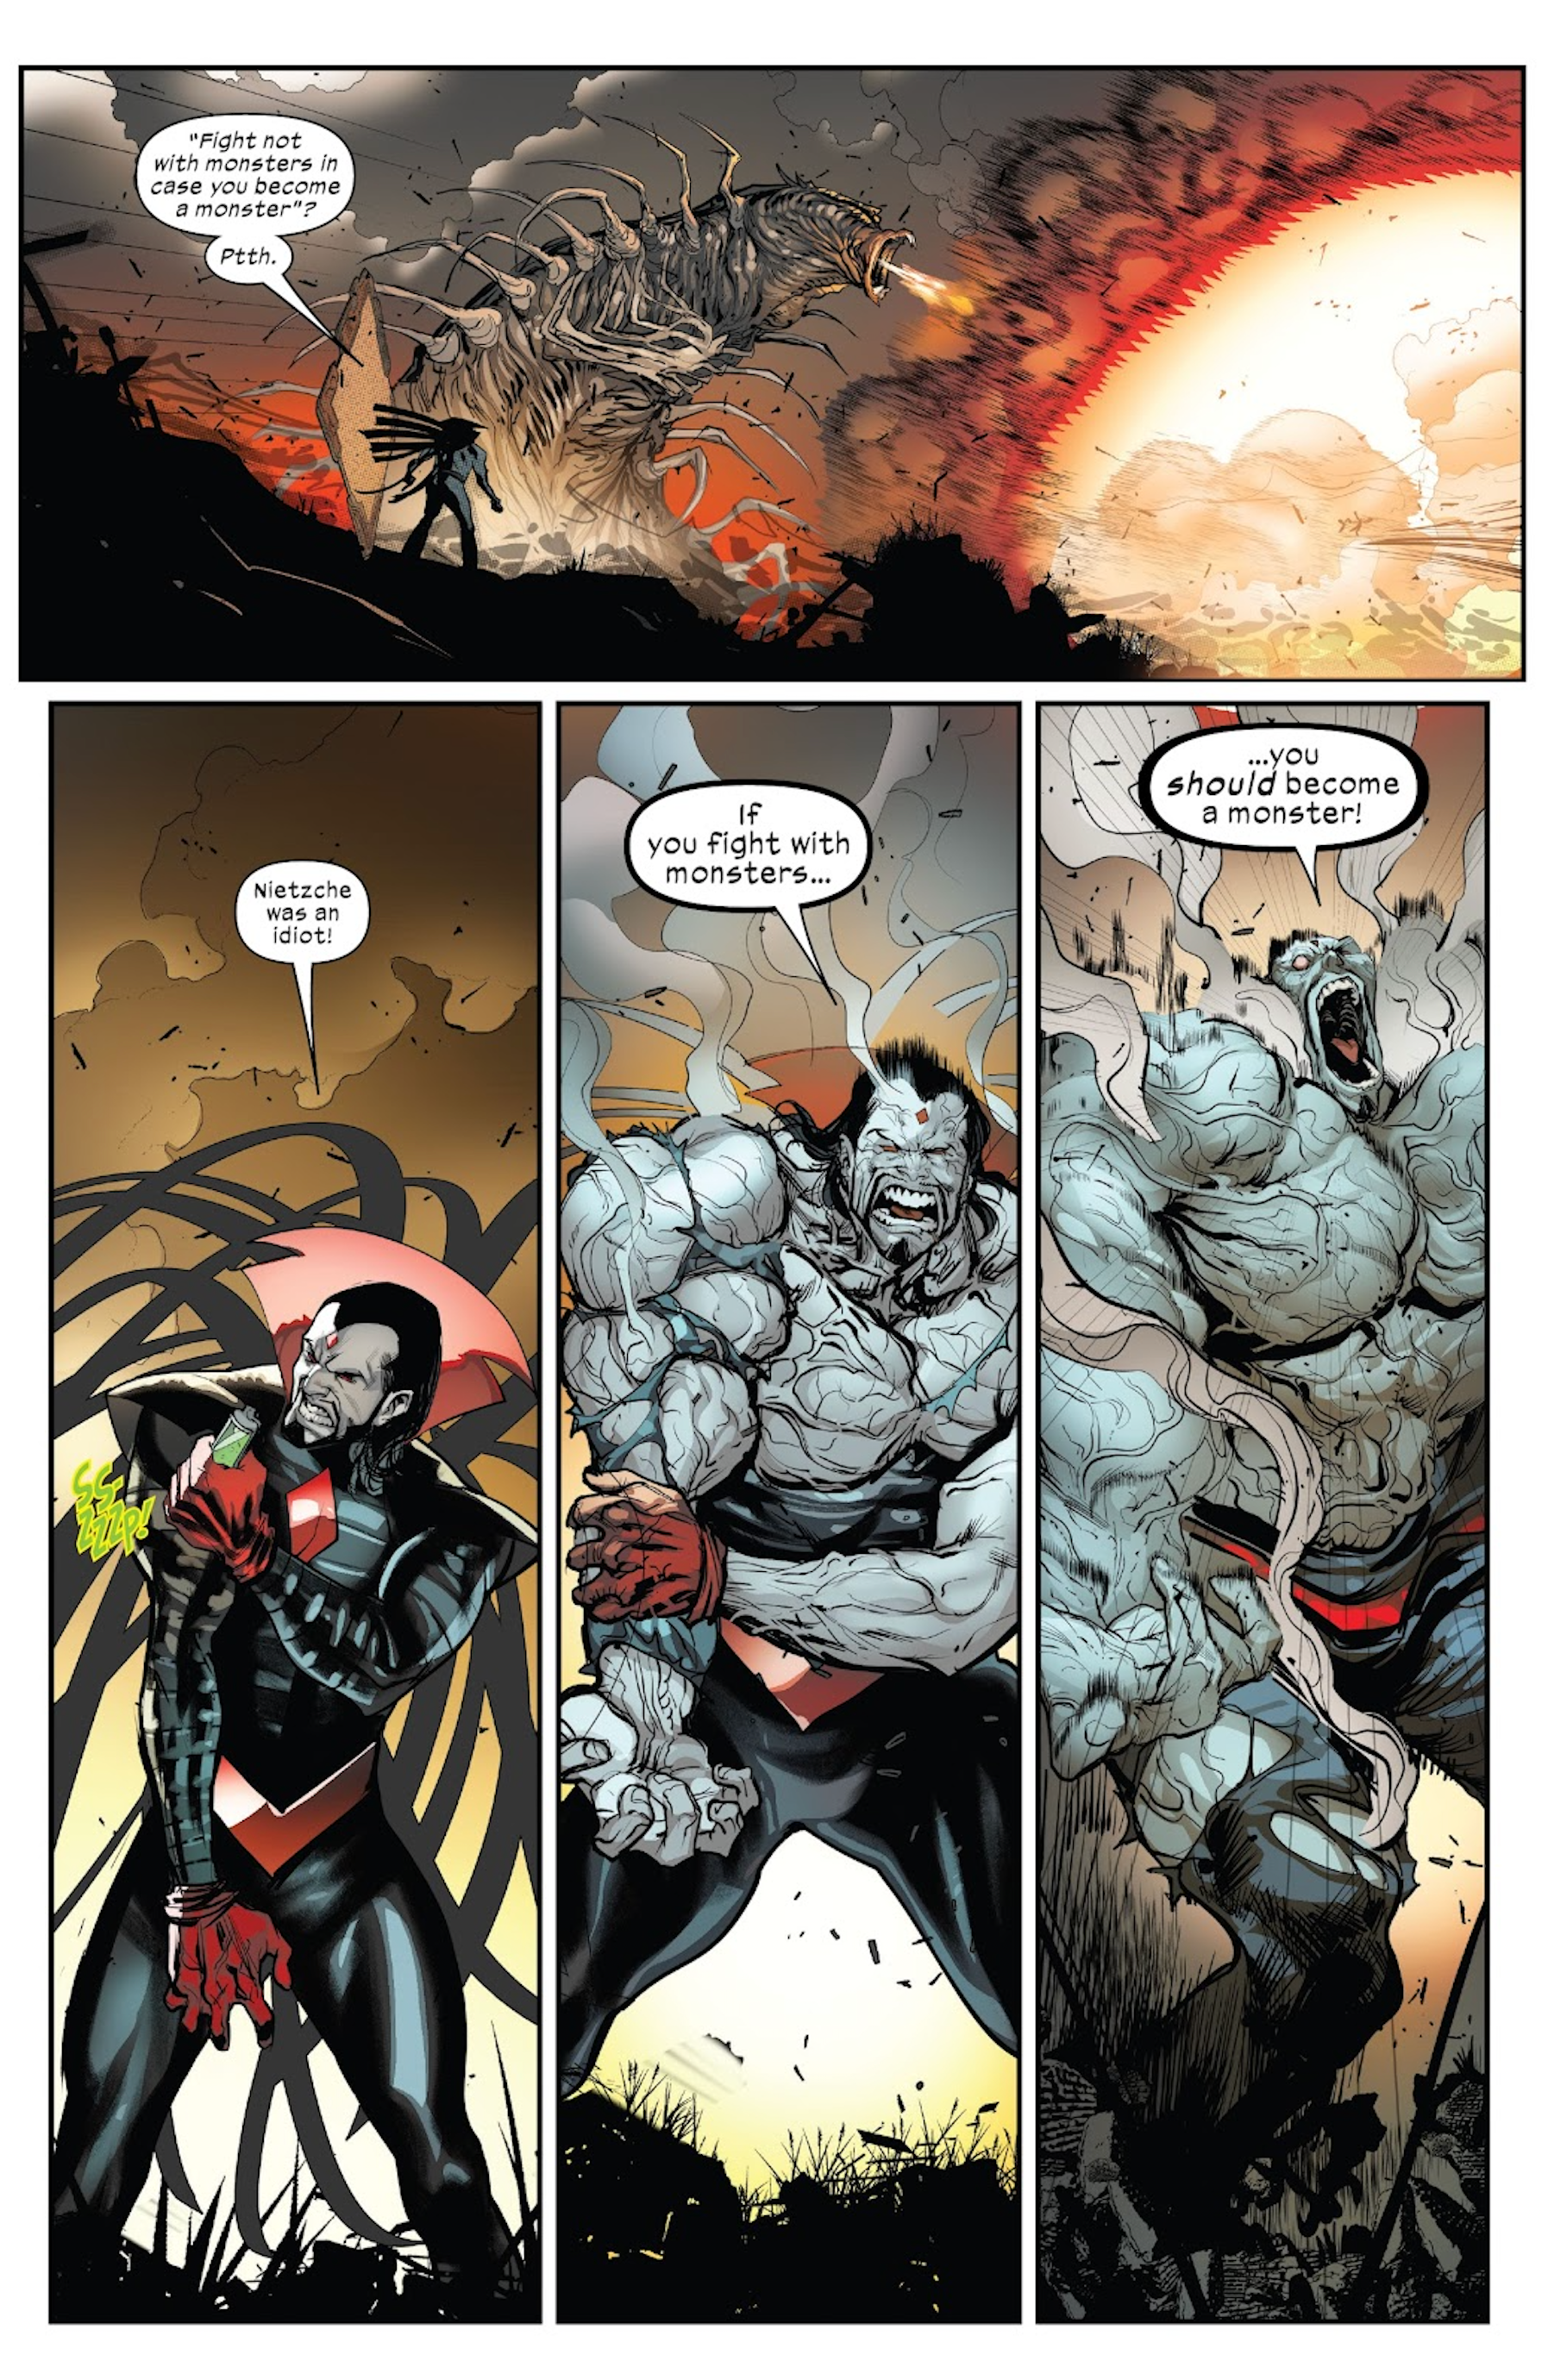 Mr Sinister turns into the Hulk in X Men